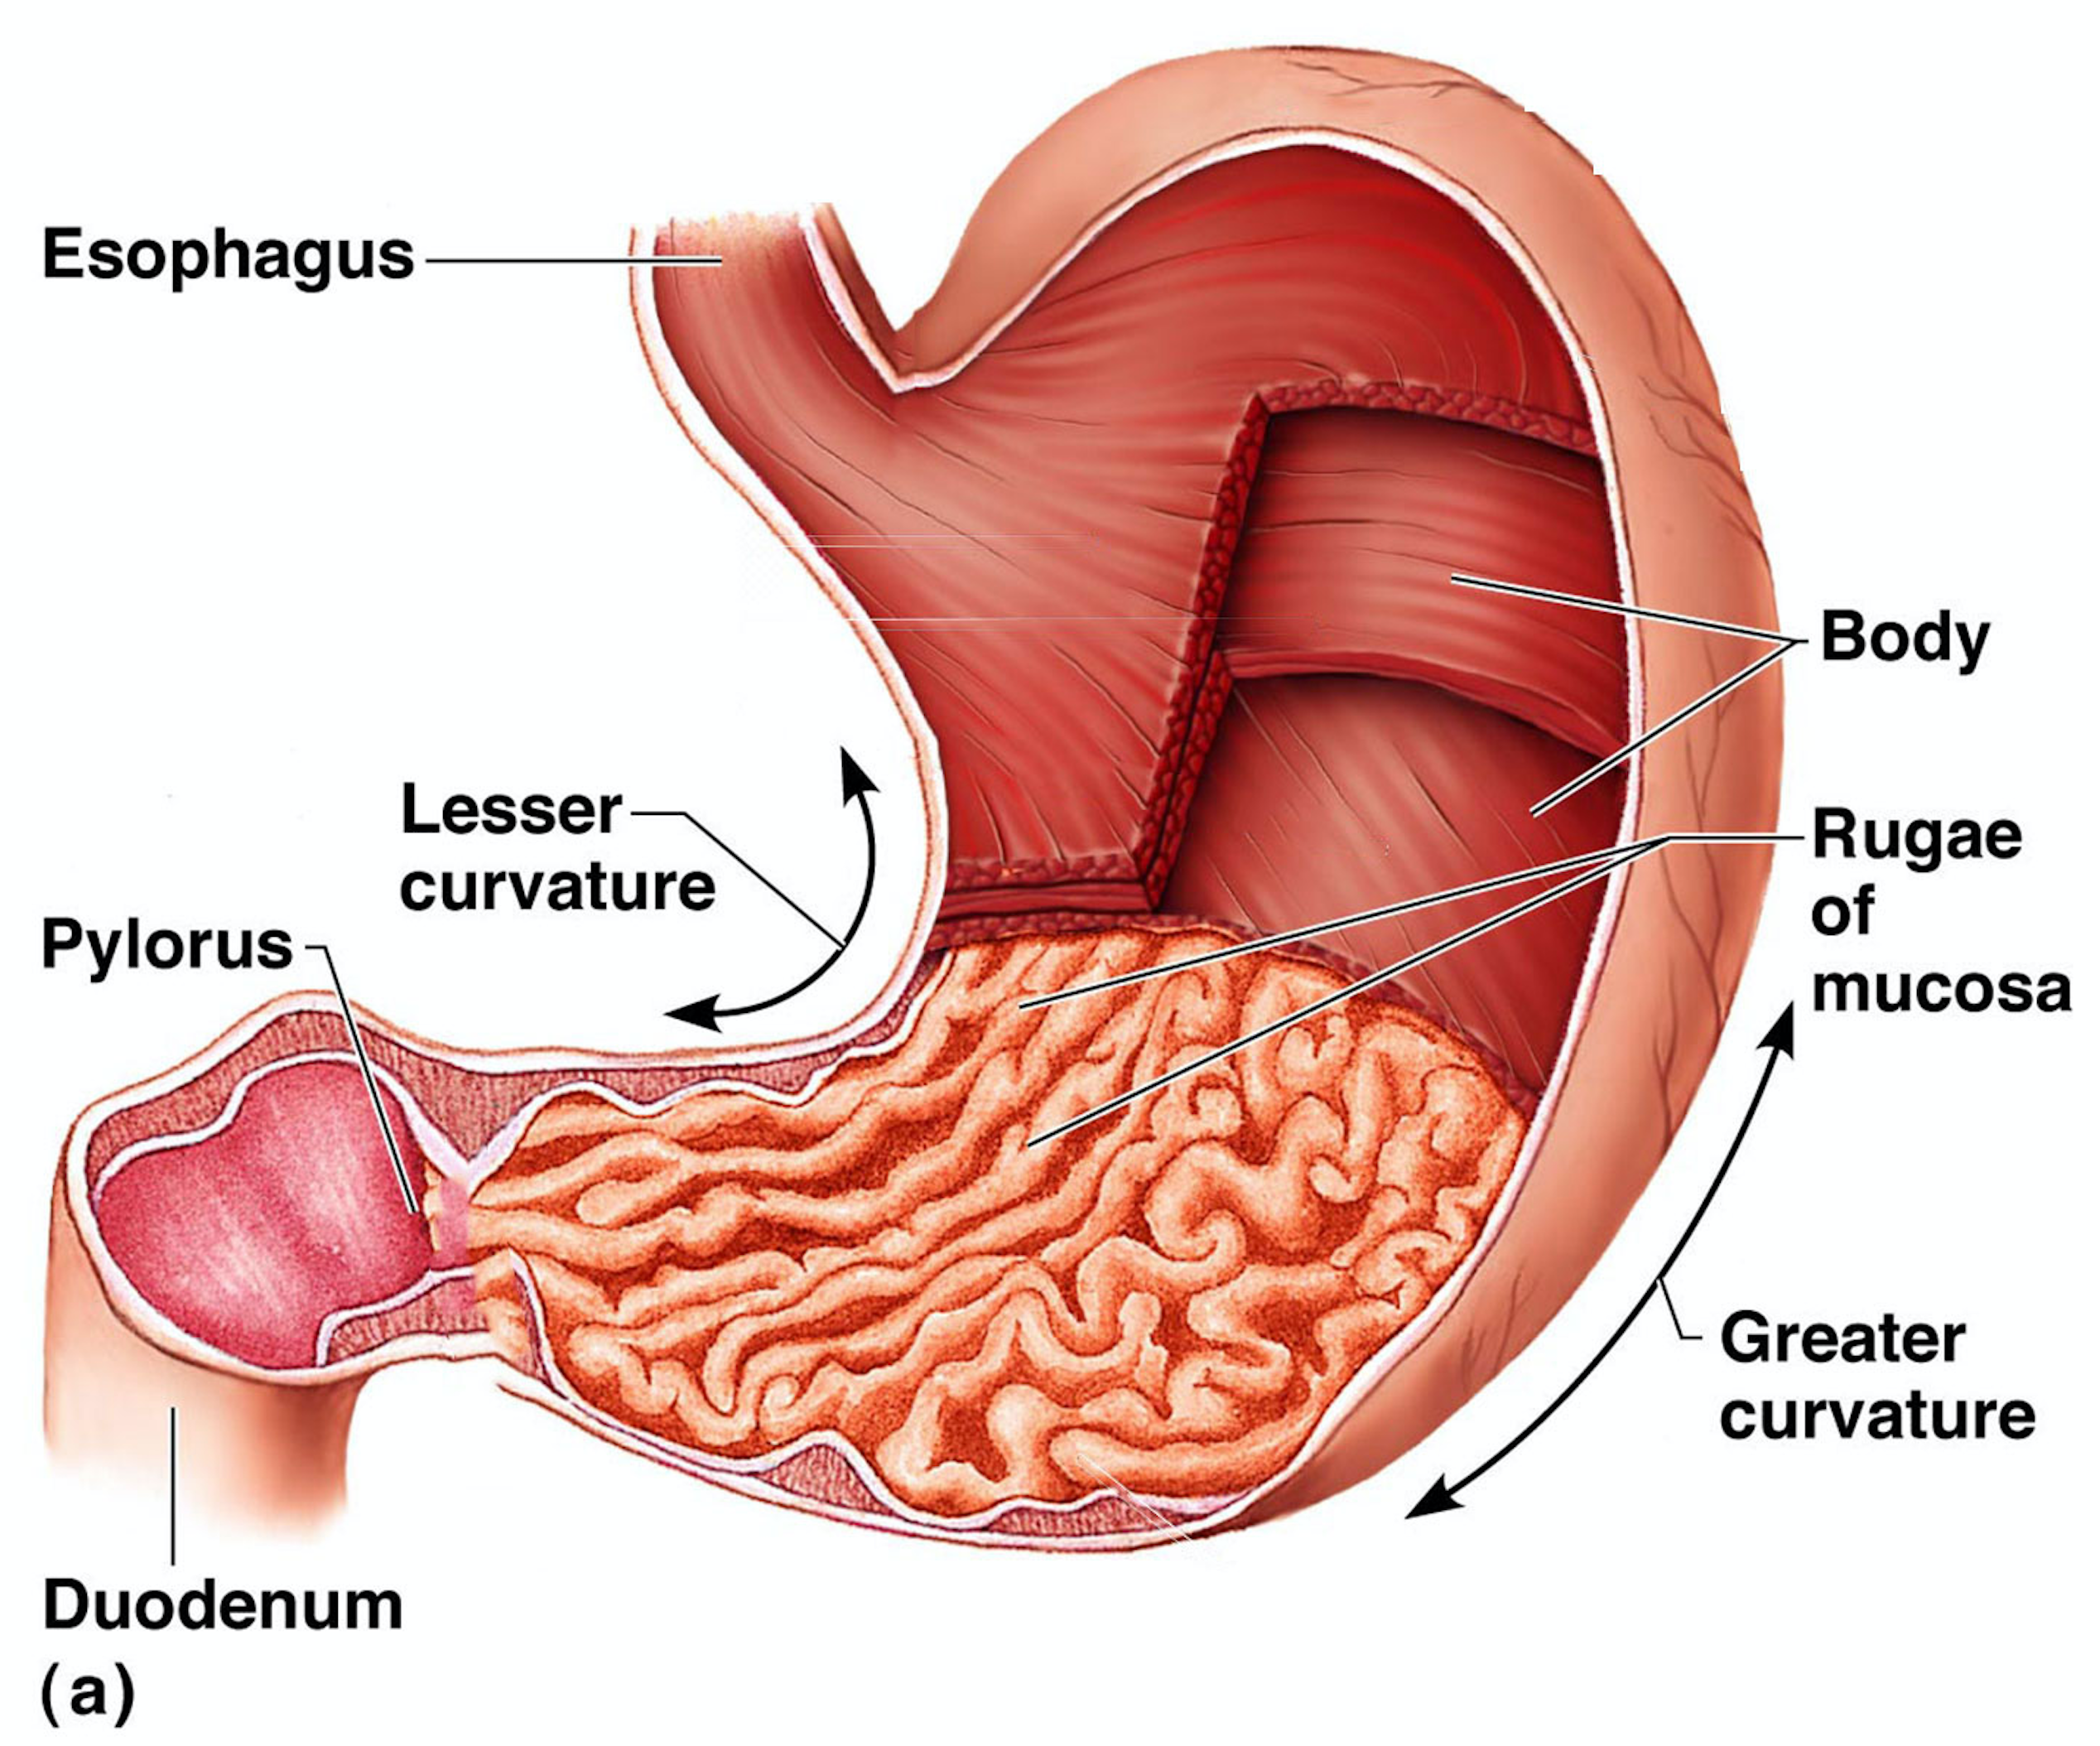 anatomy of the stomach to understand the gastric sleeve